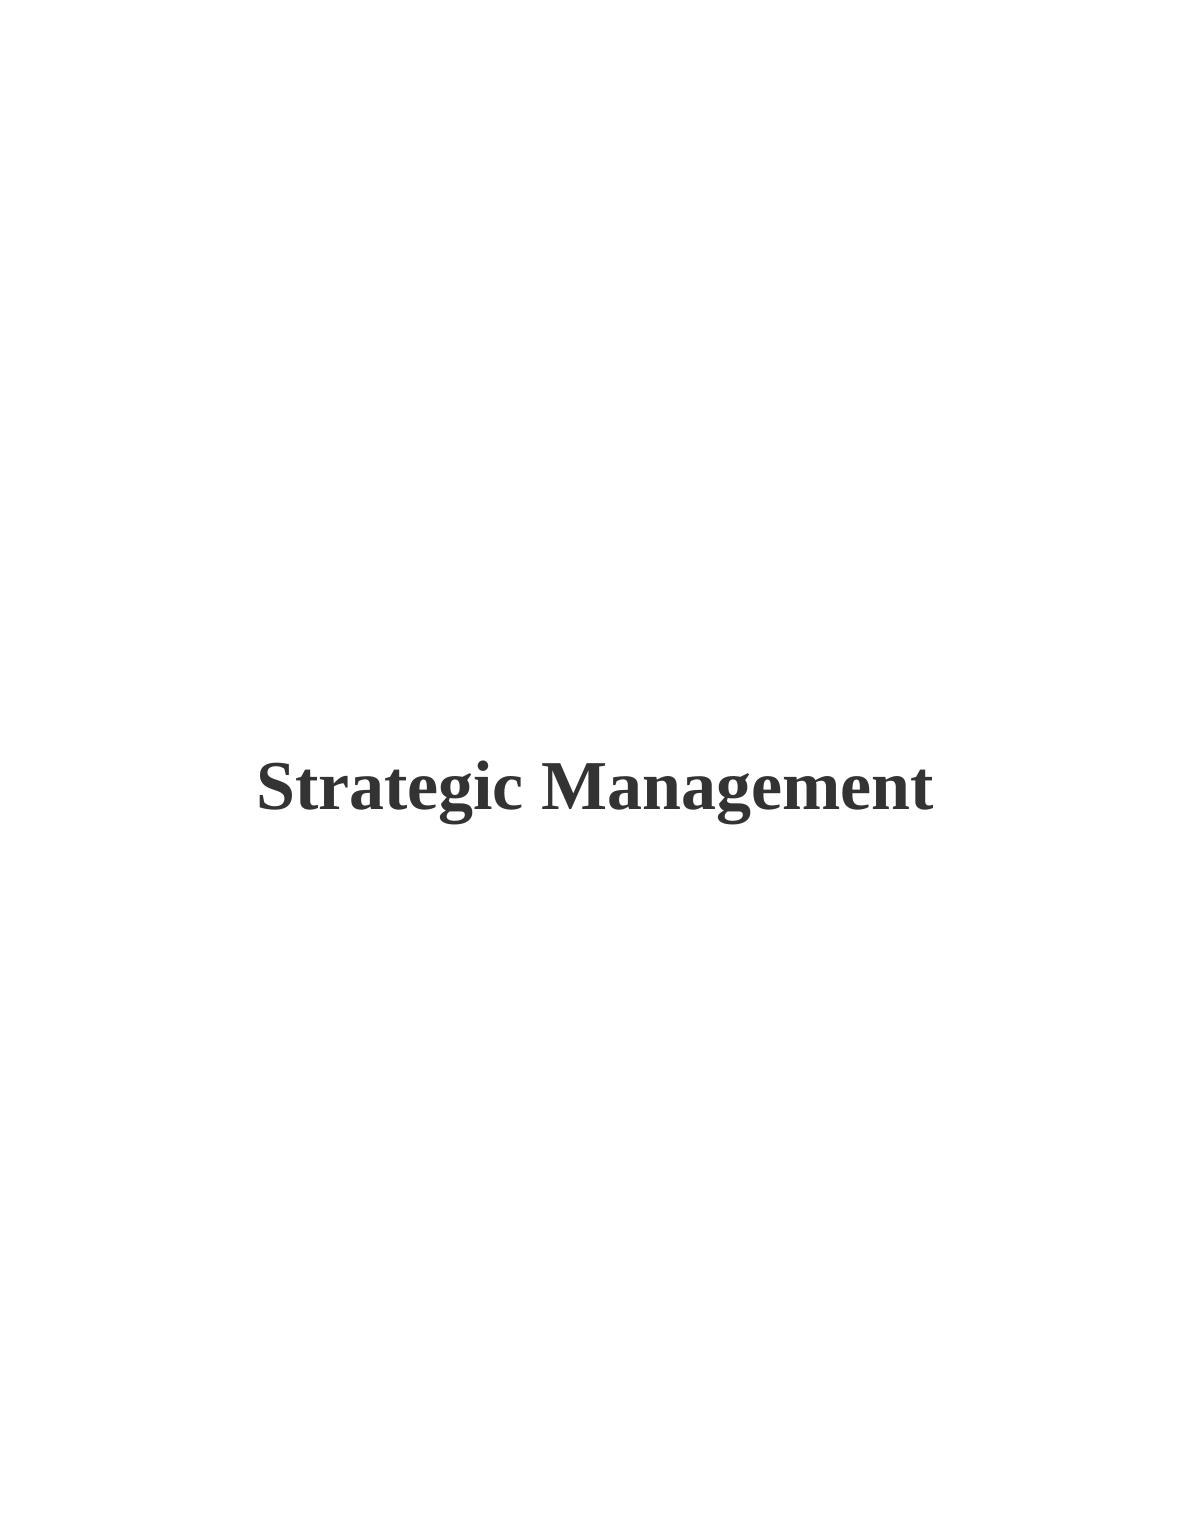 Report on Strategic Planning Process for an Organisation_1